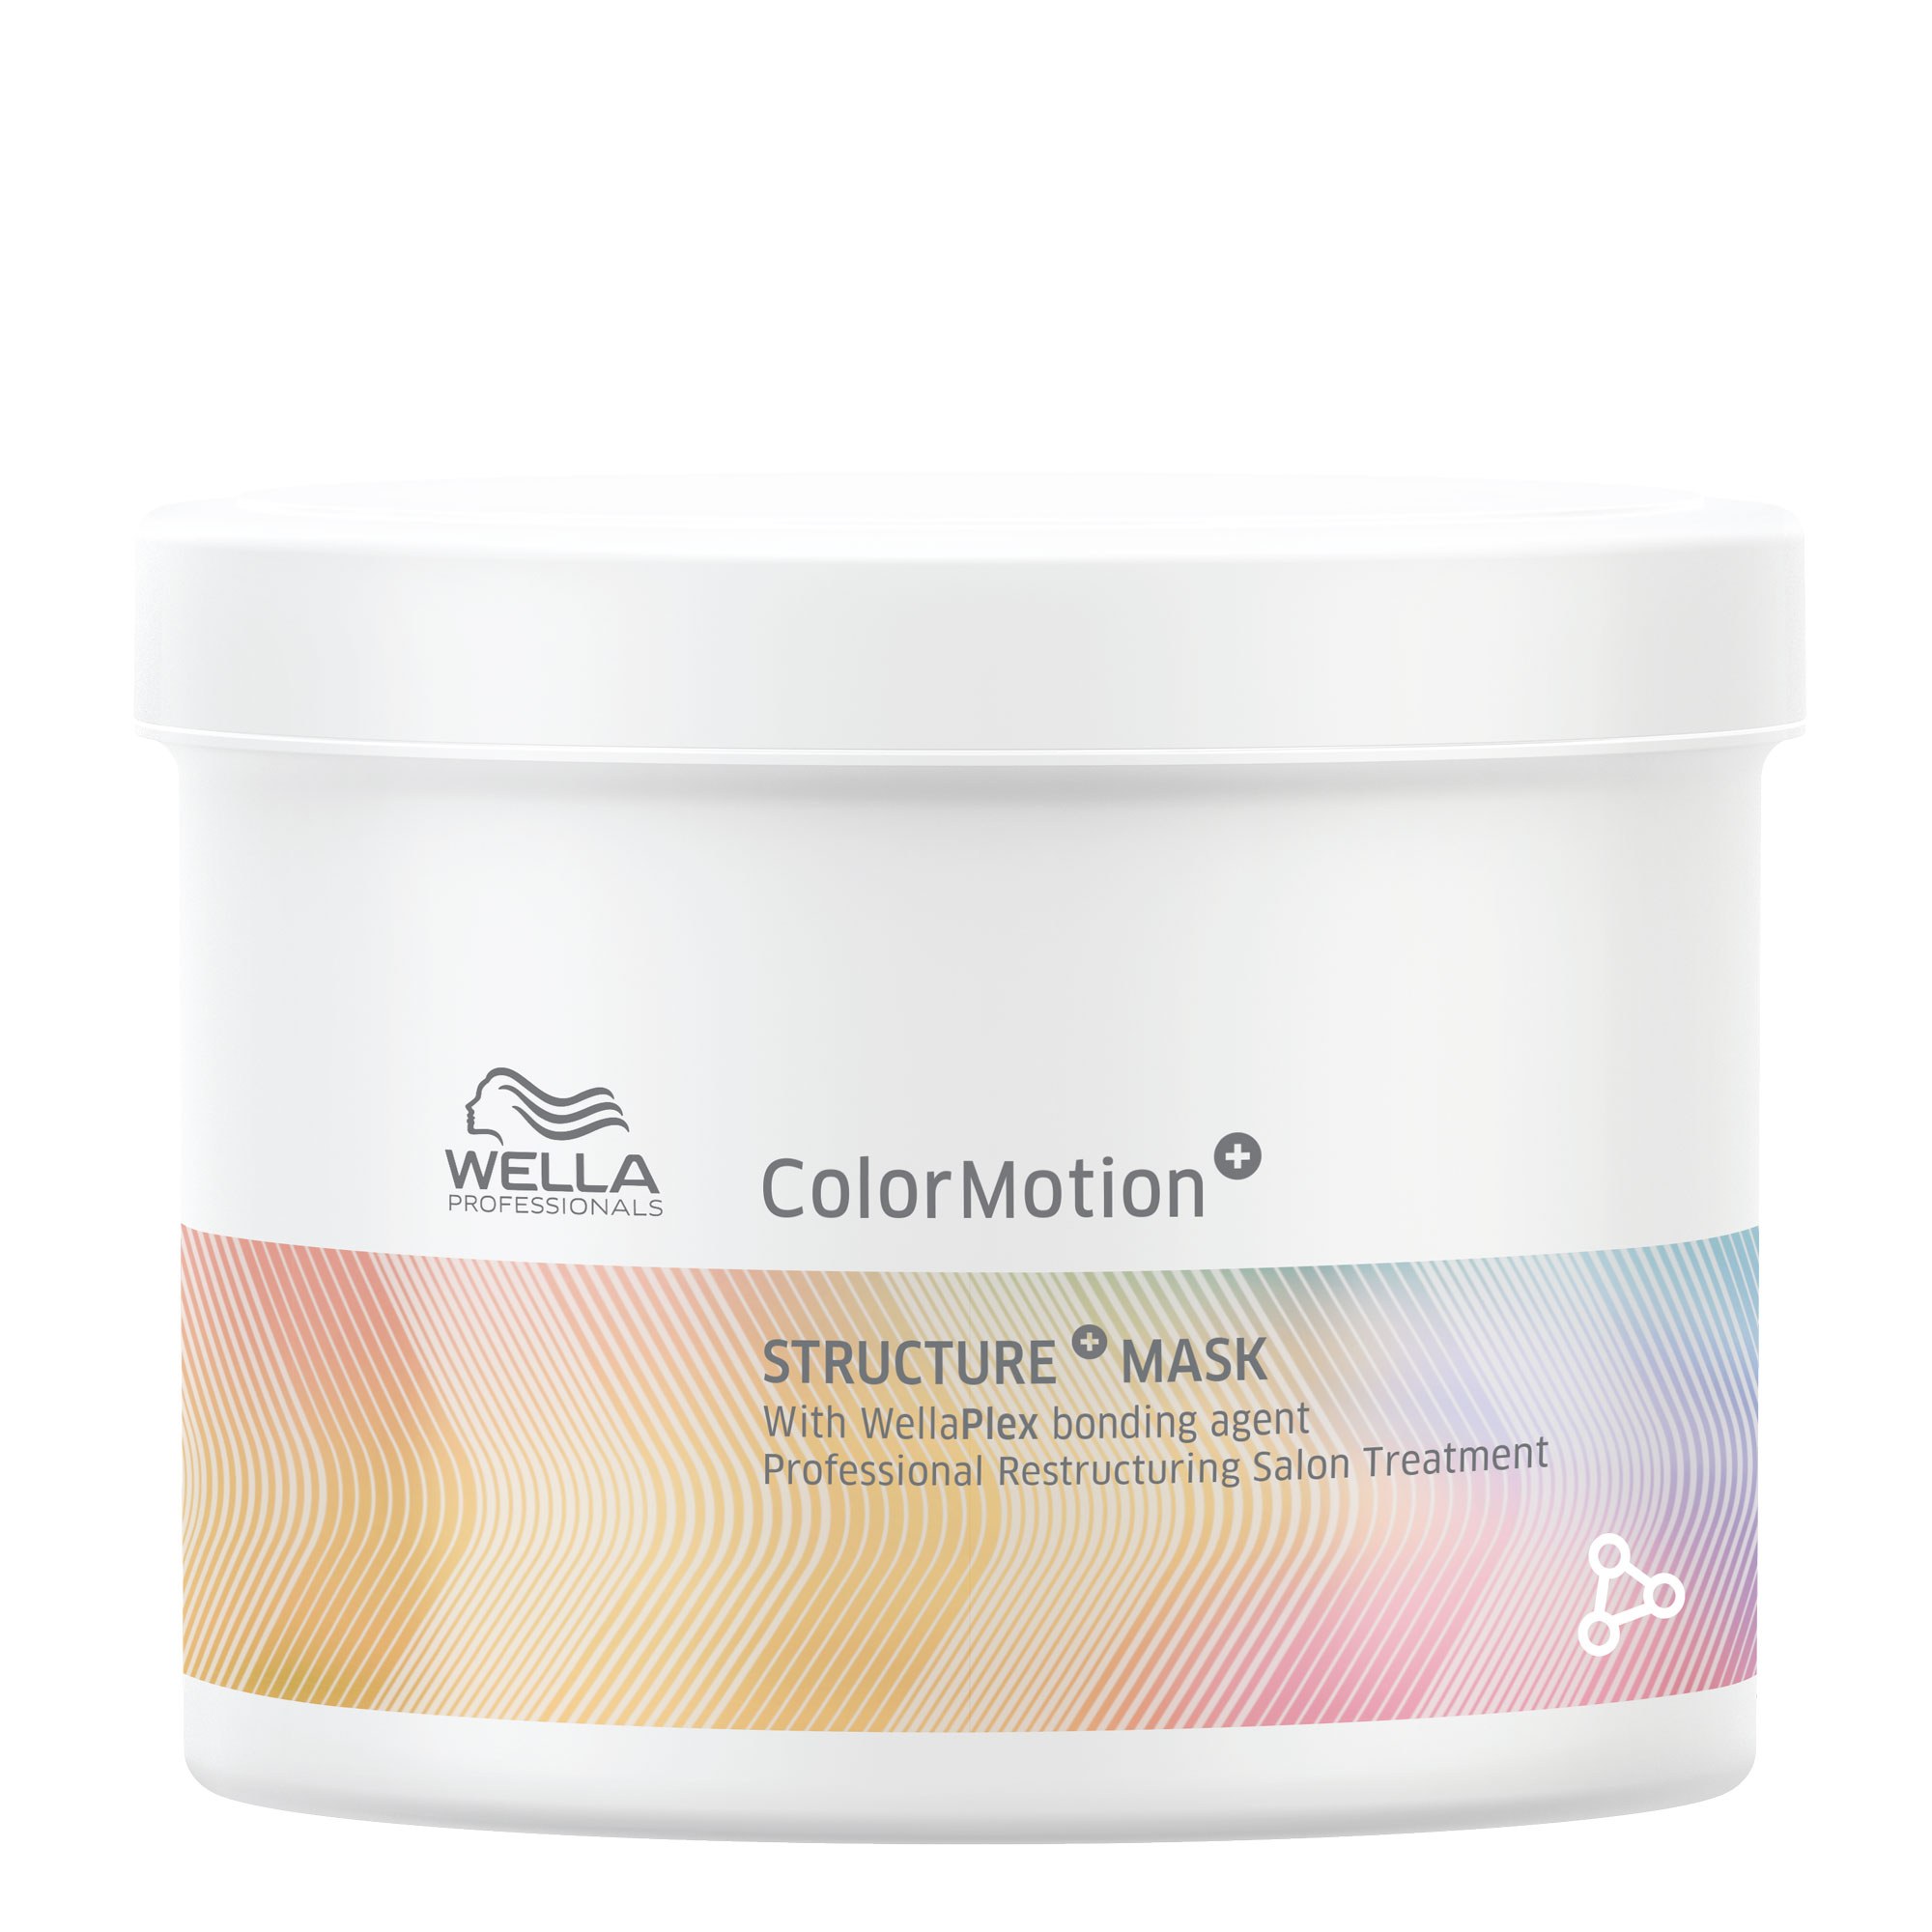 Wella ColorMotion+ Structure + Mask